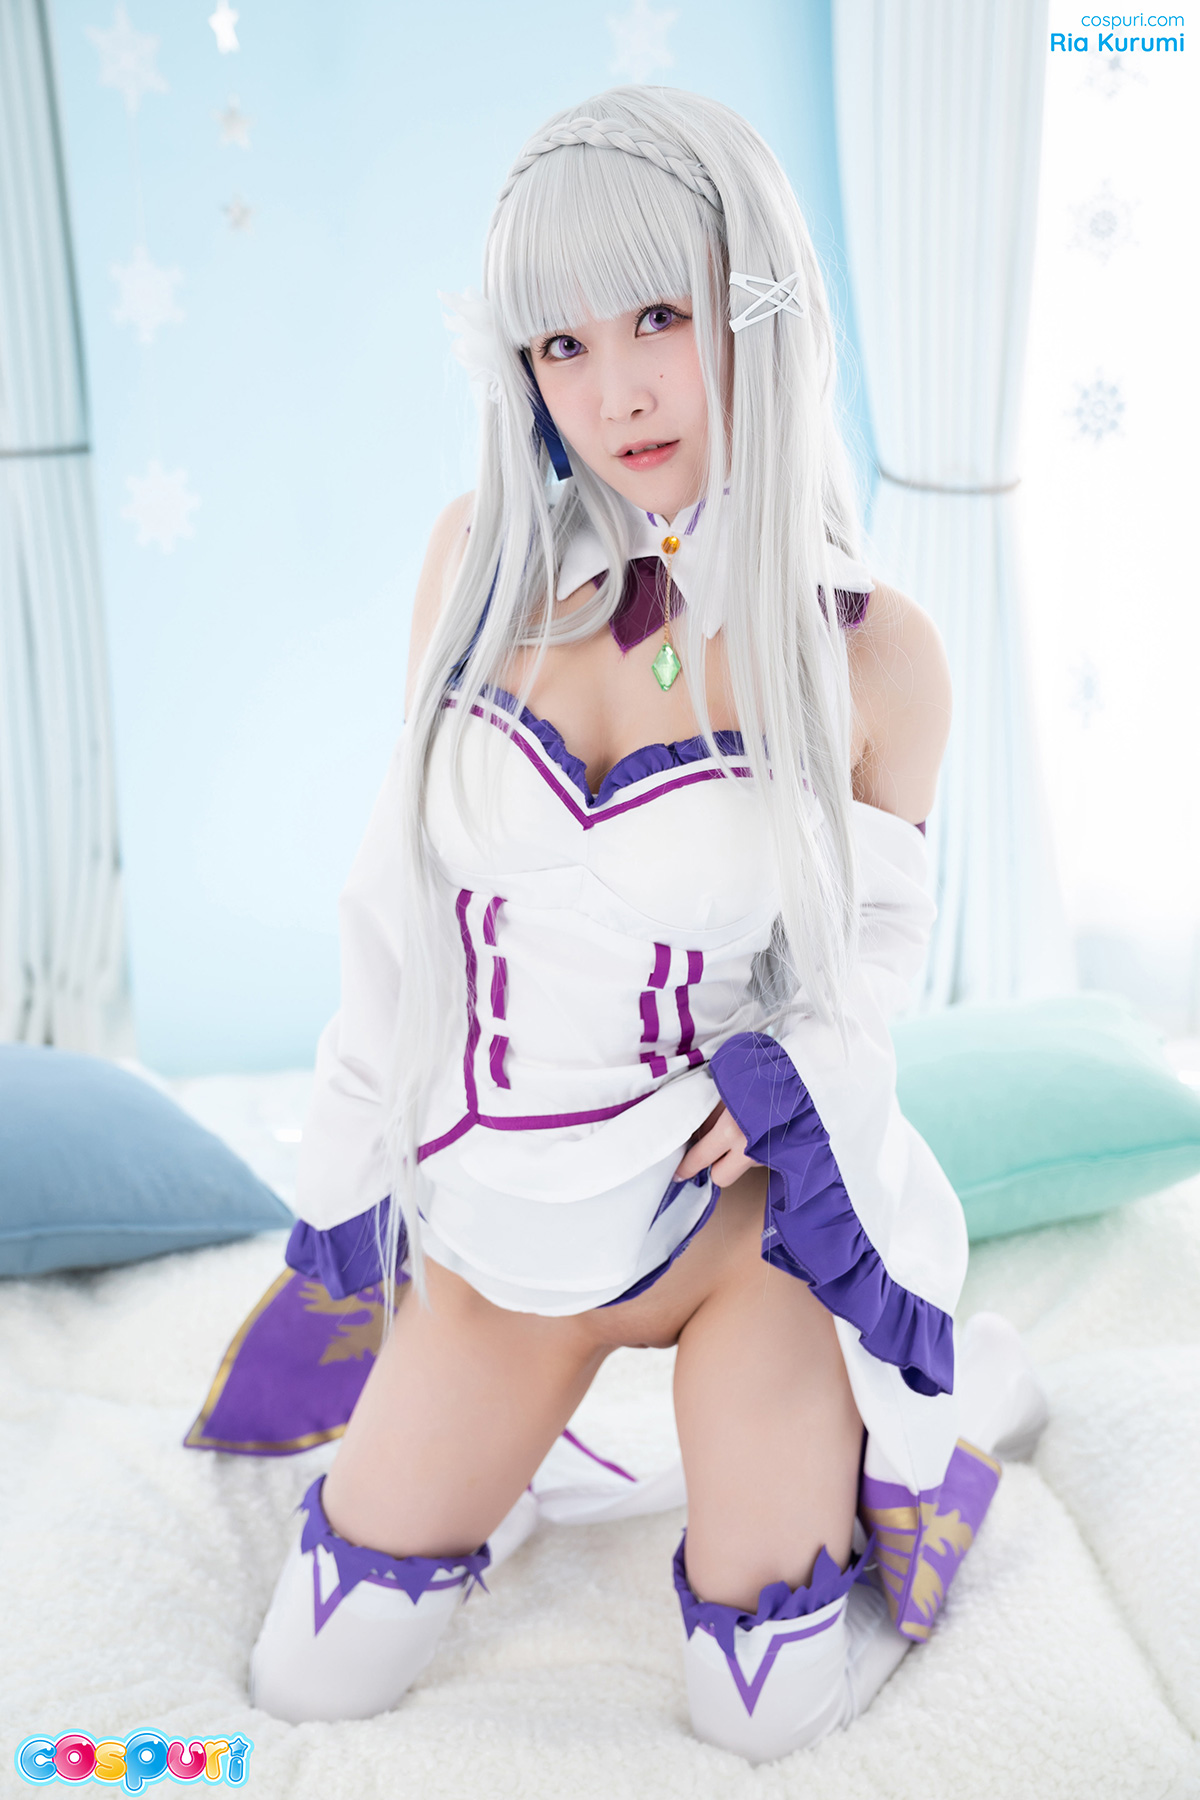 Japanese cosplay sexy character porn